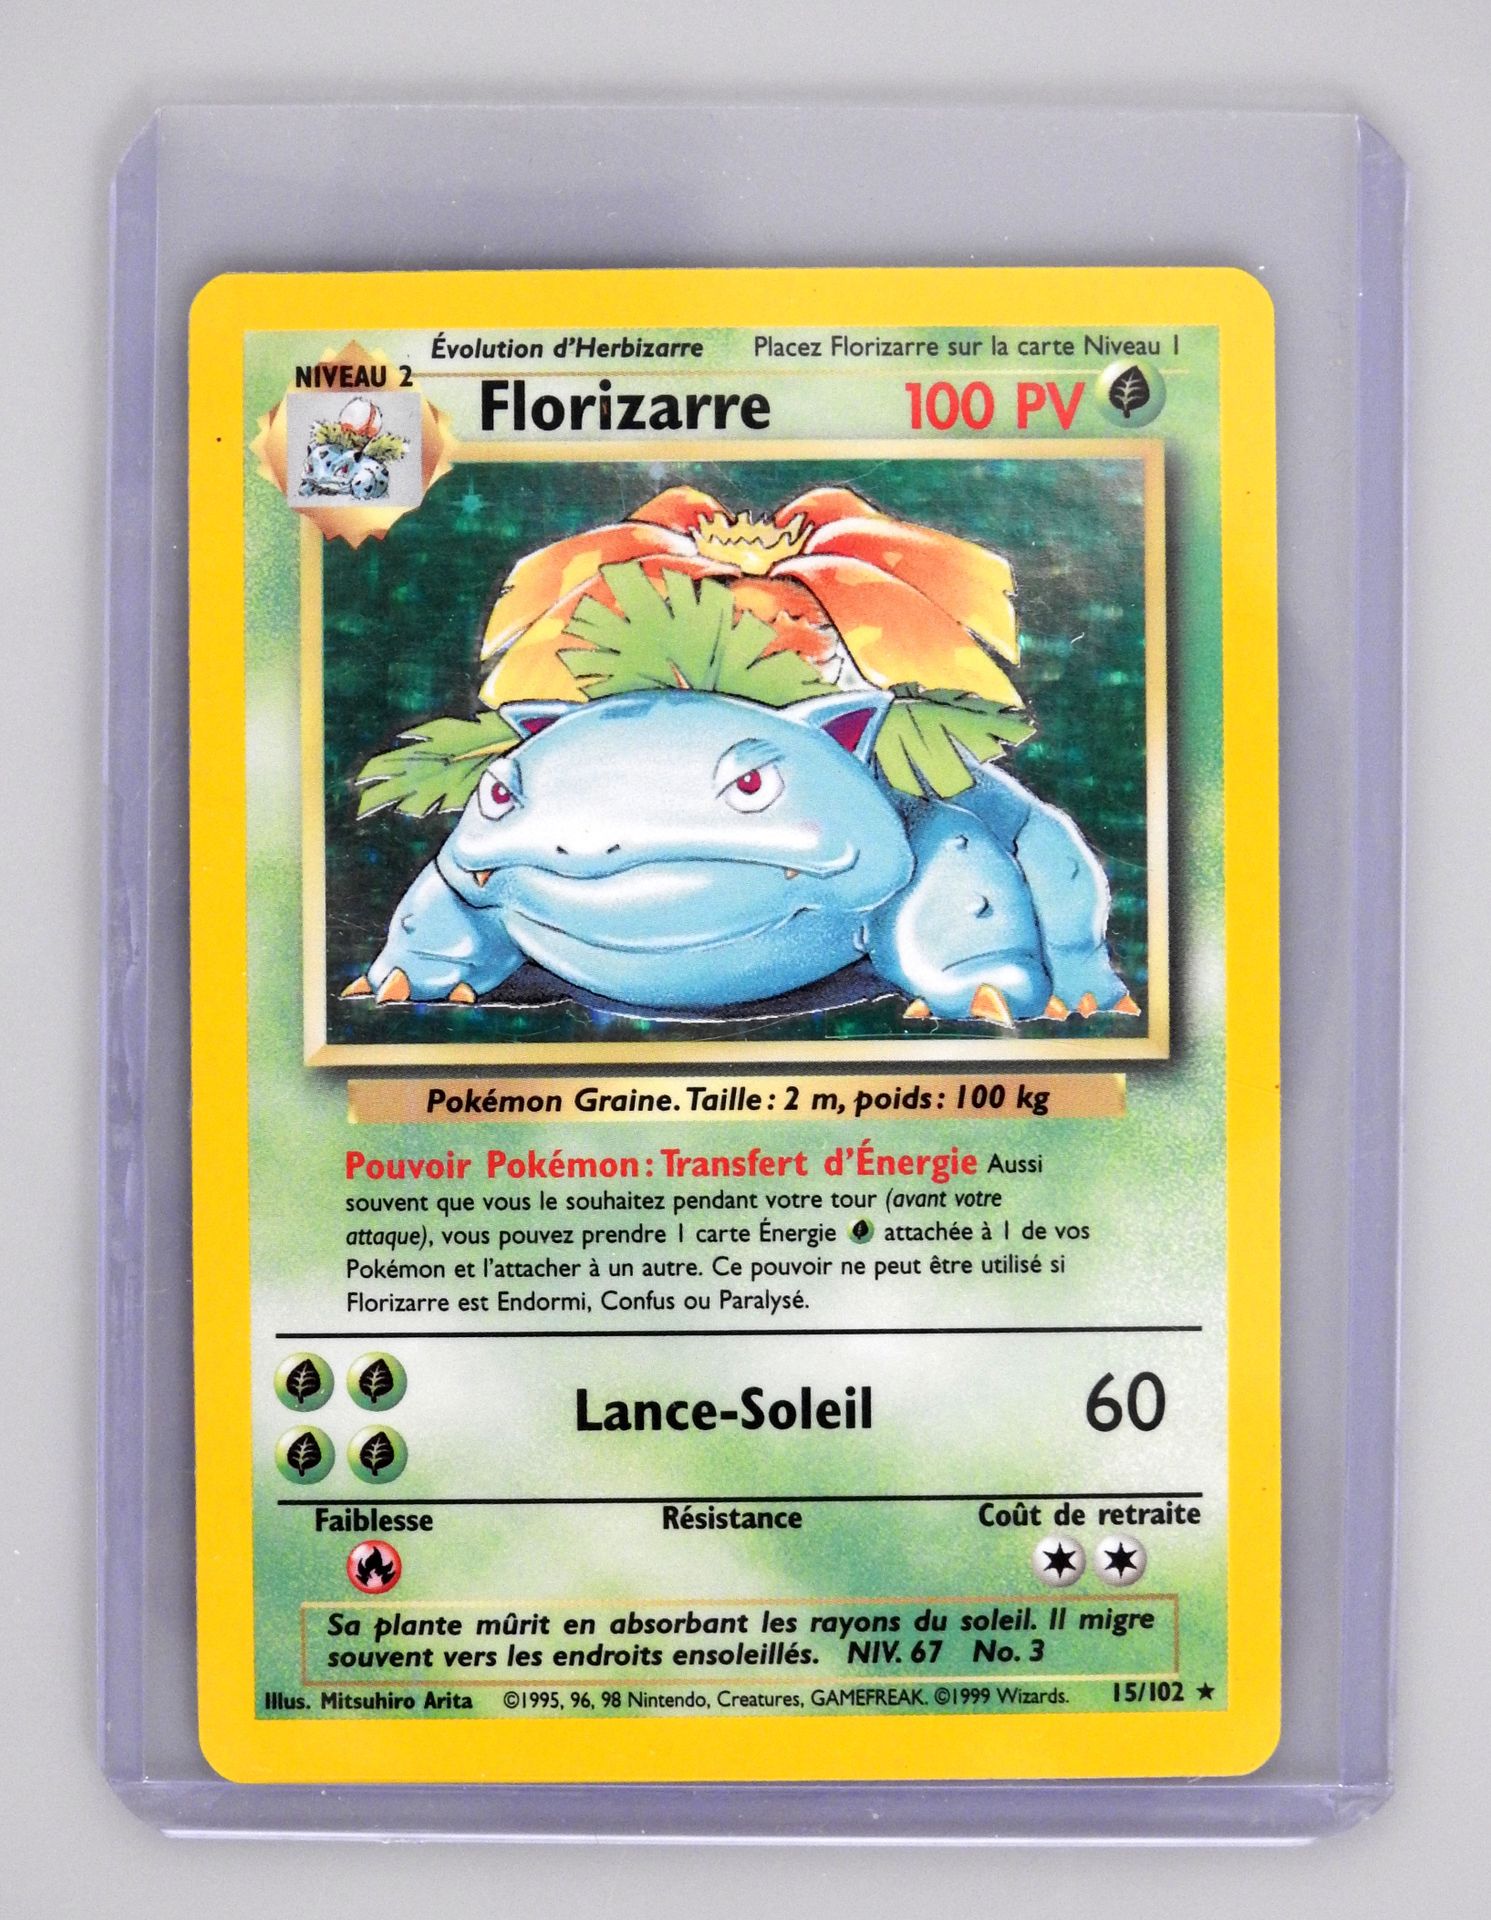 Null FLORIZARRE Ed 2

Wizards Block Basic Set 15/102

Pokemon card in great cond&hellip;